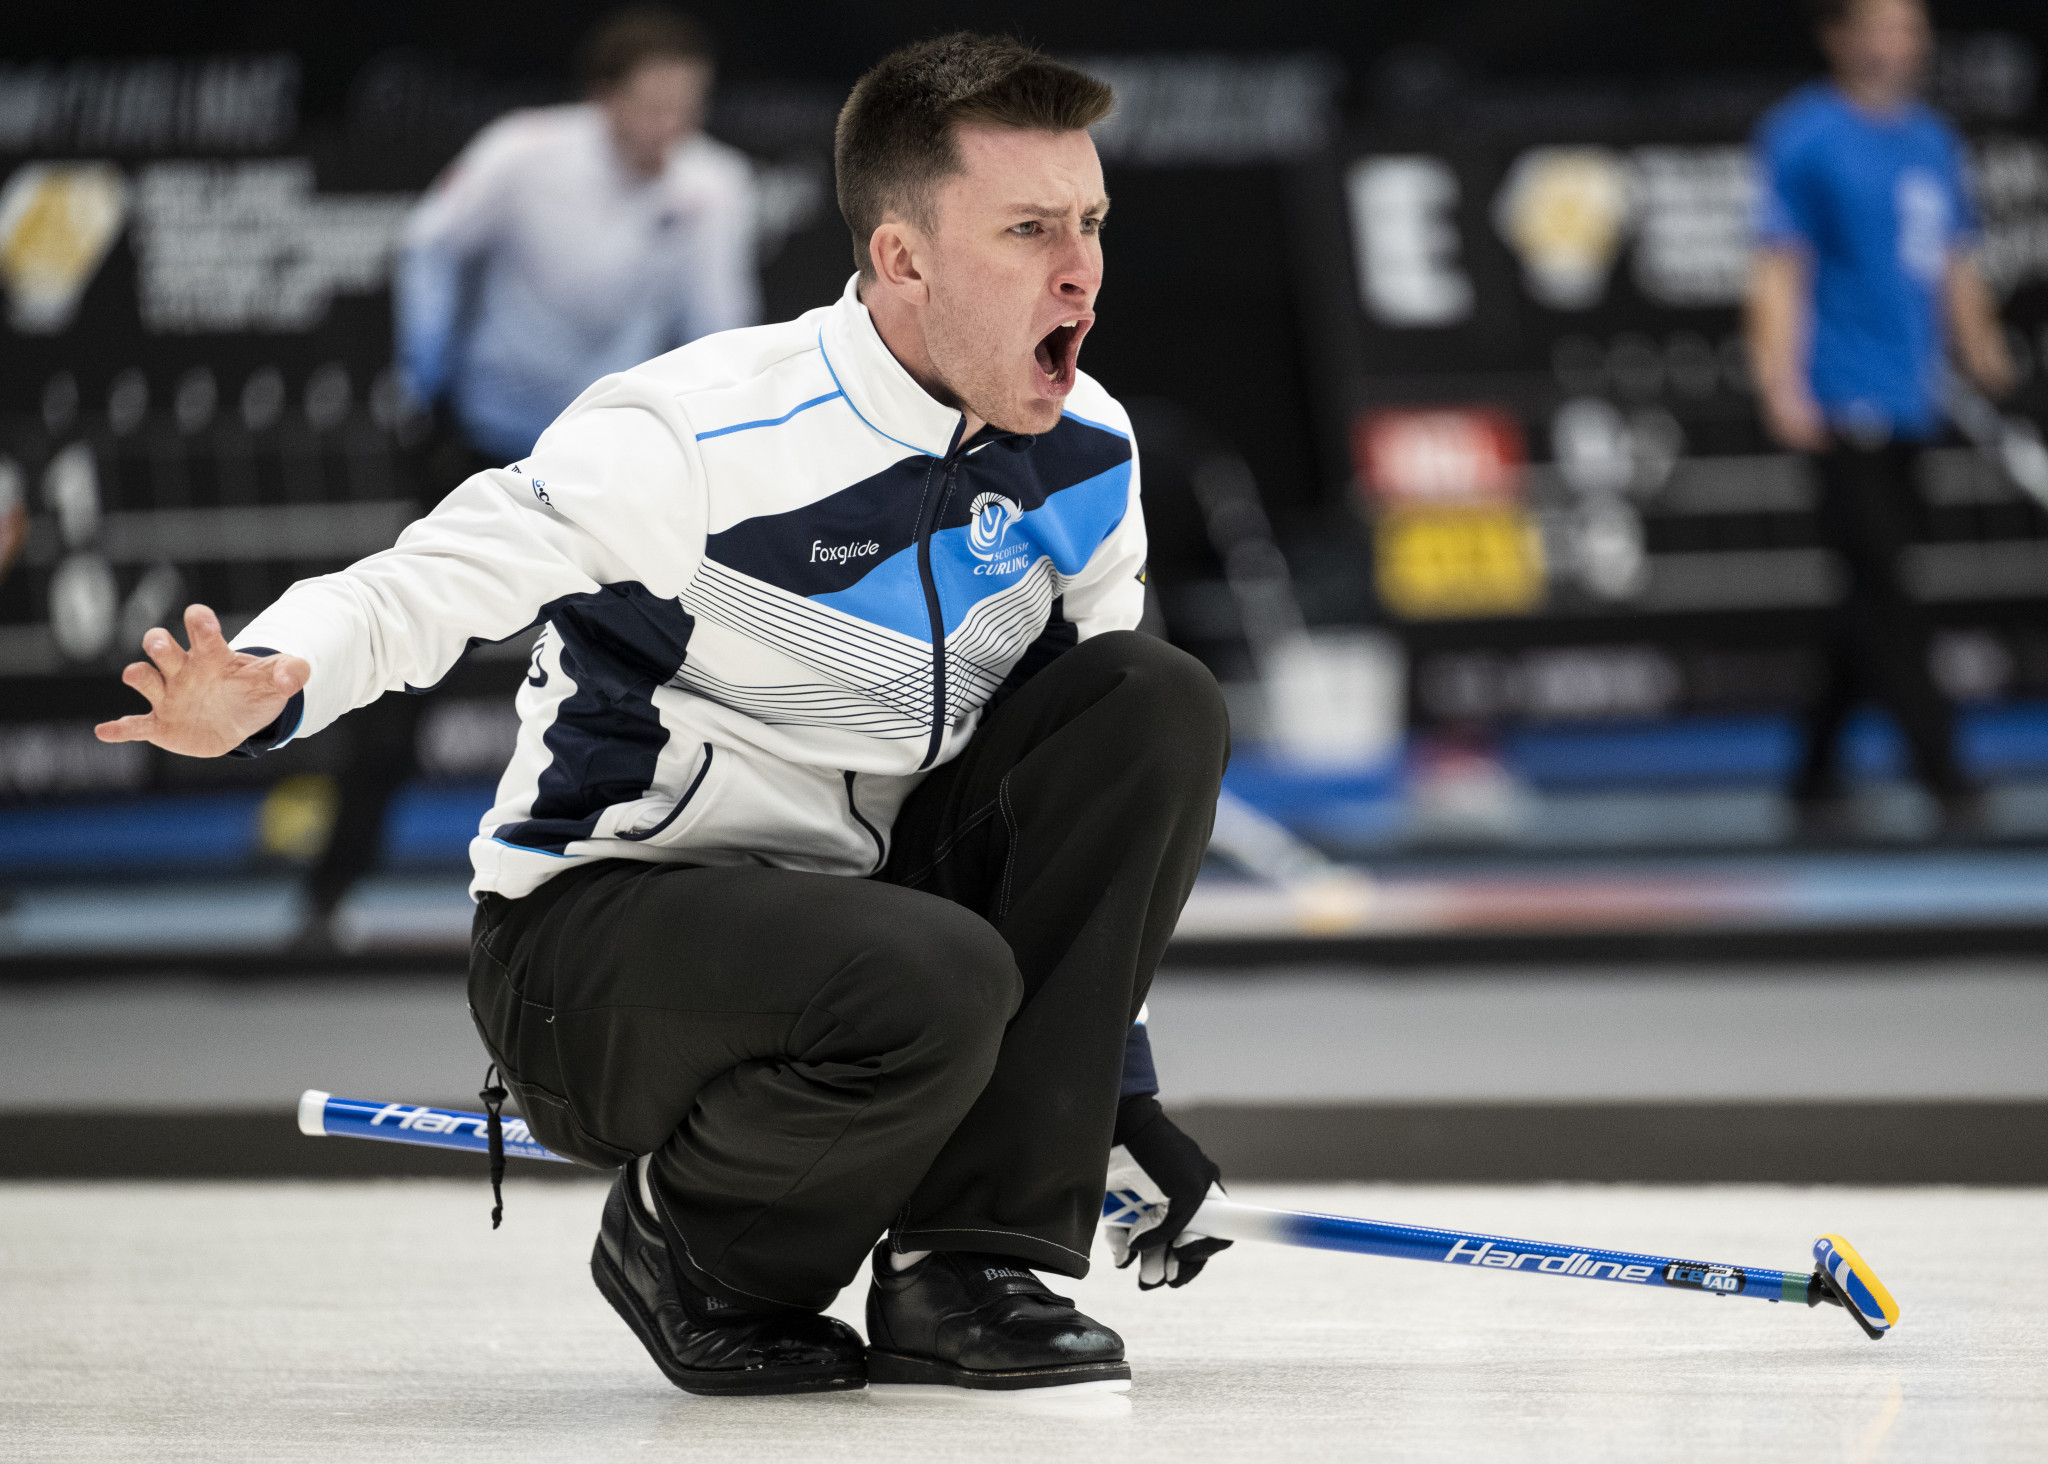 Scotland and Japan crowned champions at World Junior Curling Championships